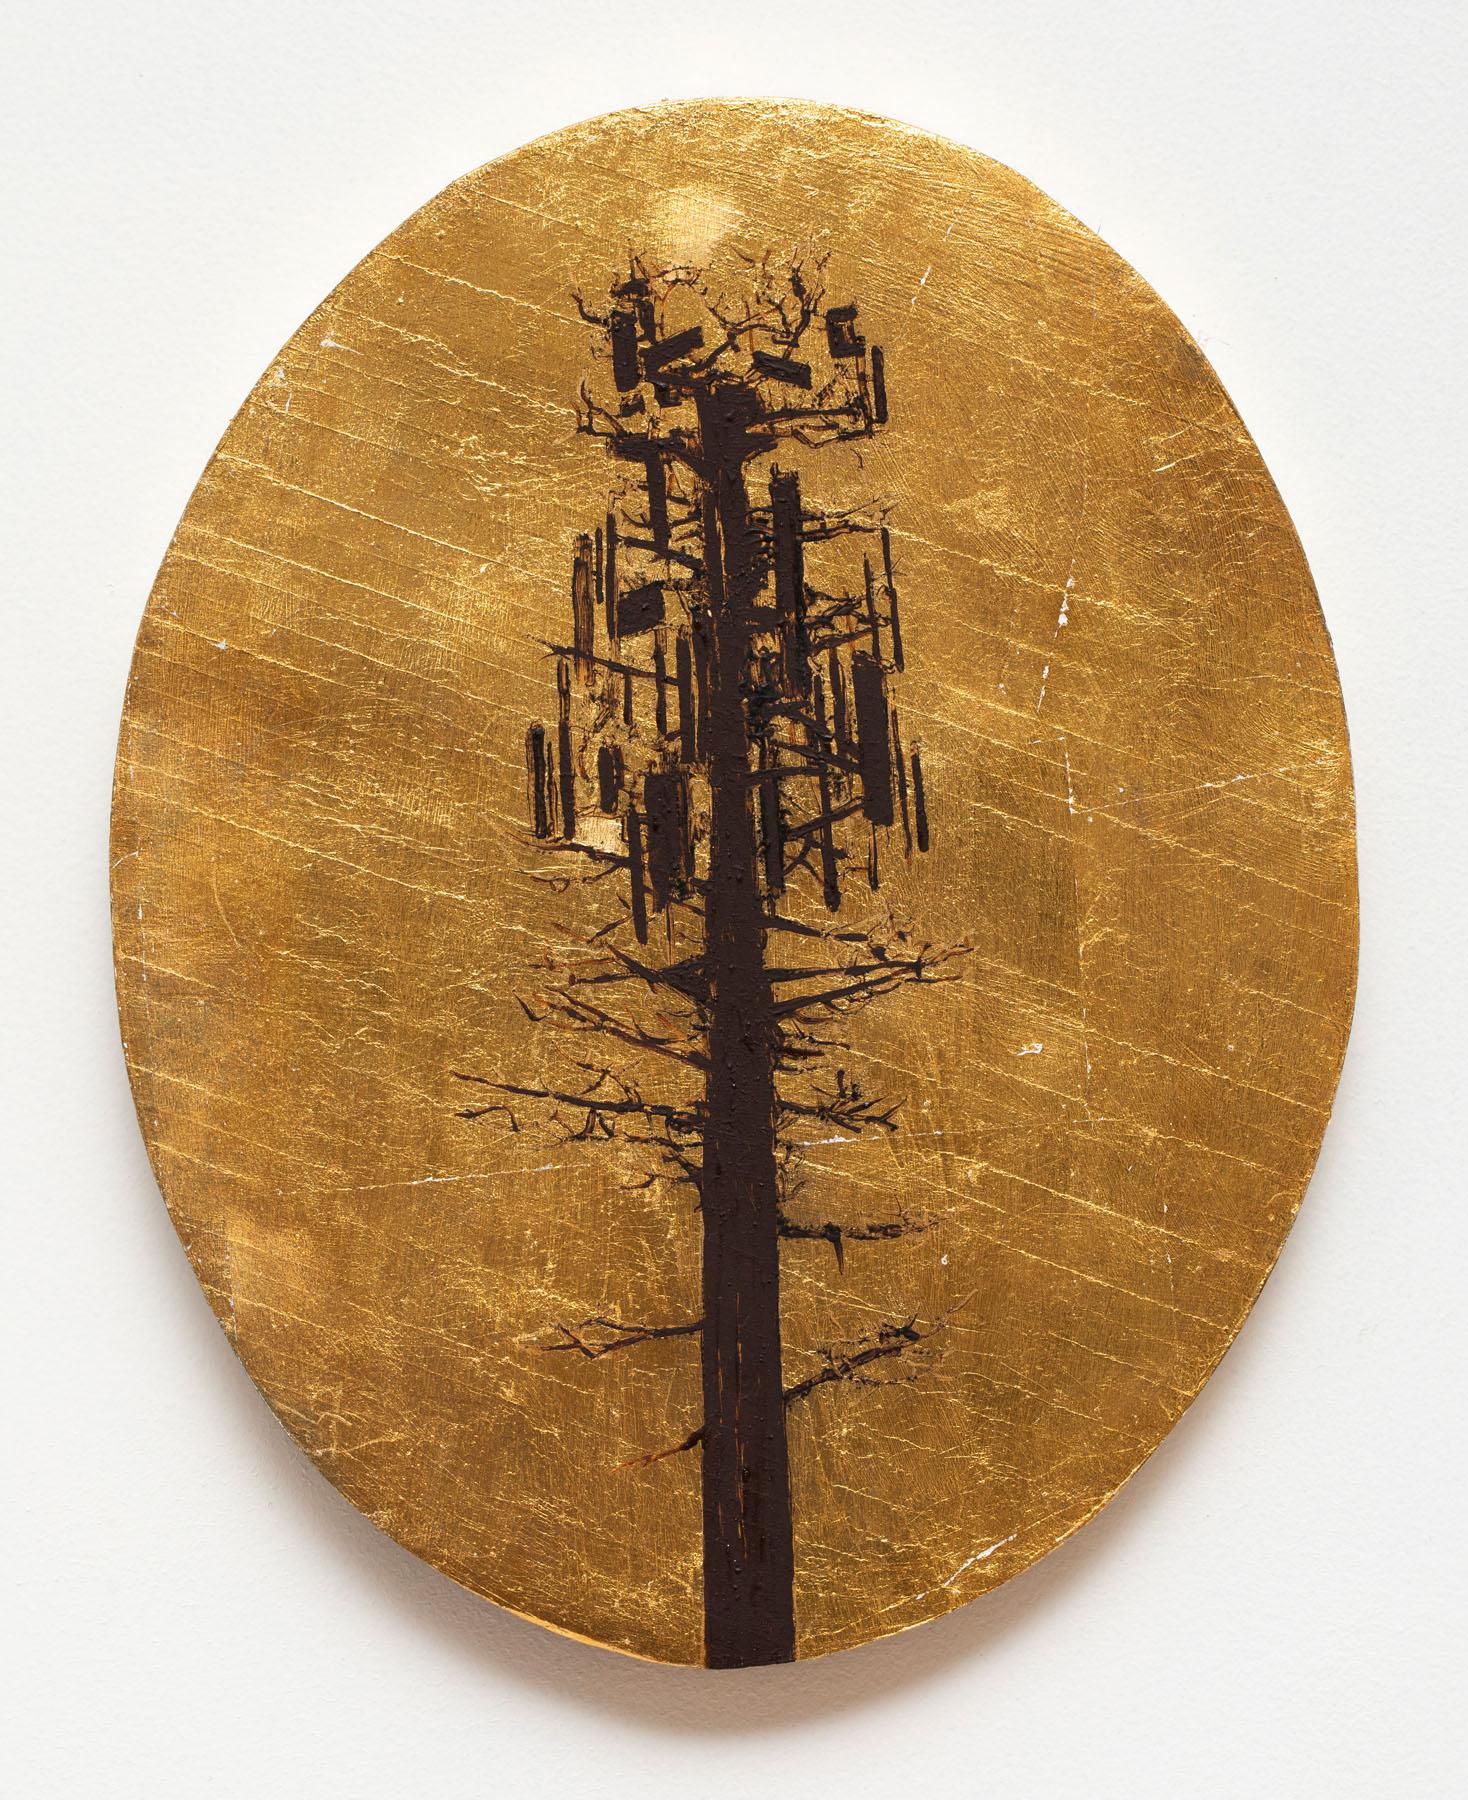 Cell Tower Tree, oil painting on oval panel, gold leaf and black